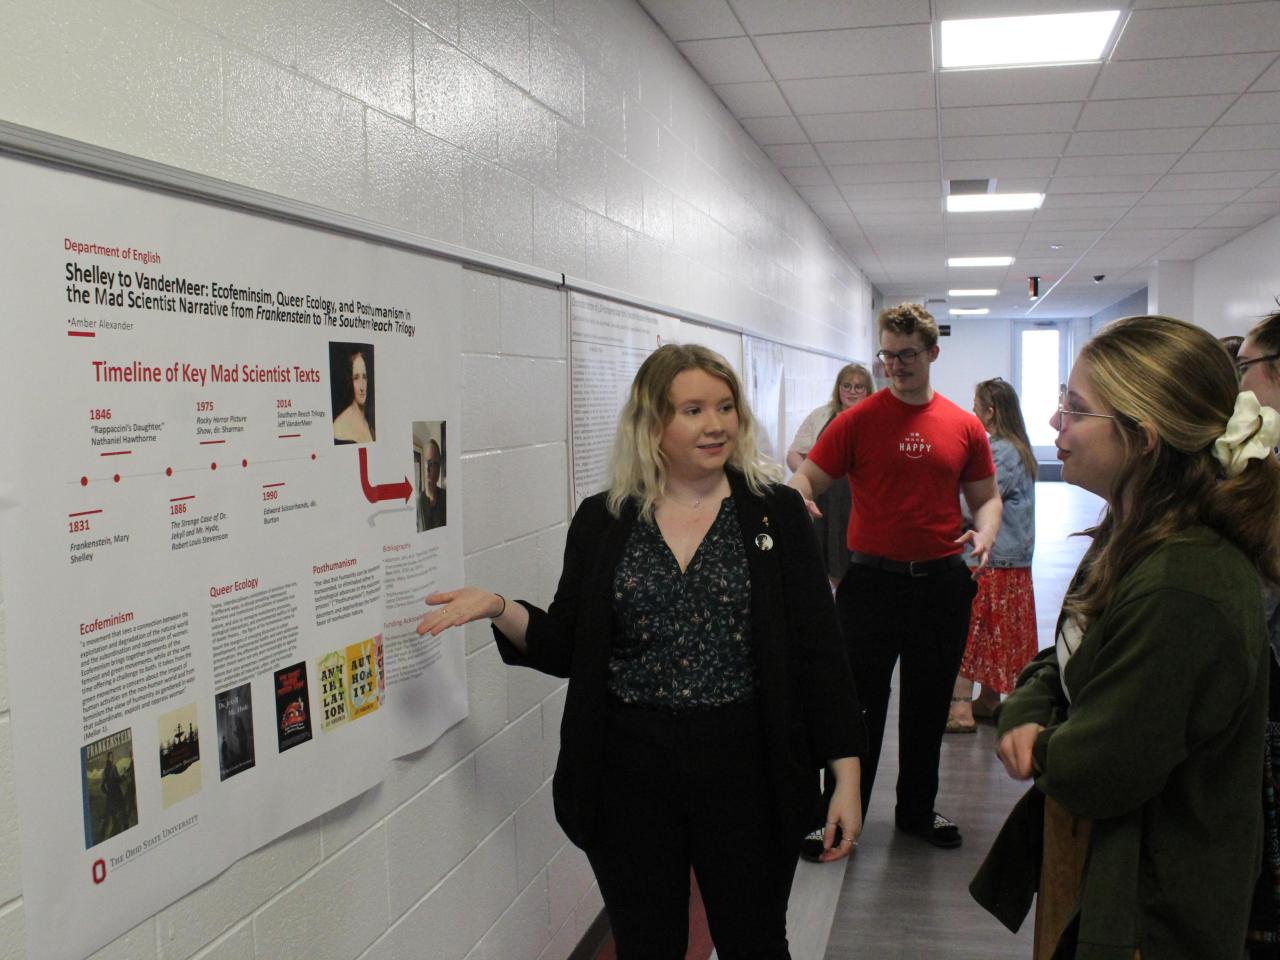 Student presents their research poster to faculty